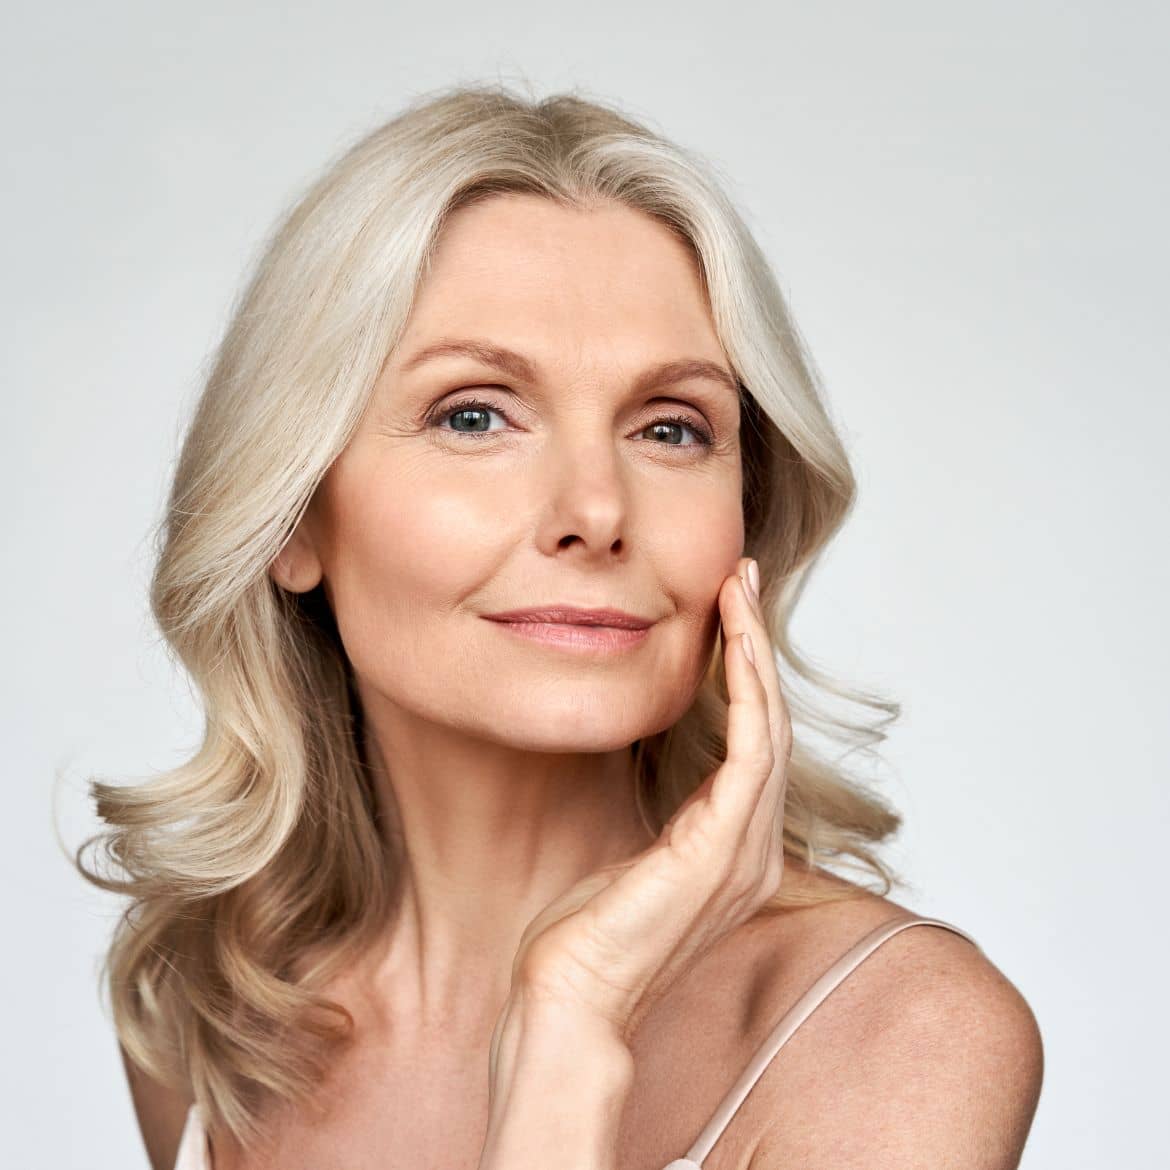 Image of a middle age woman with a radiant skin.